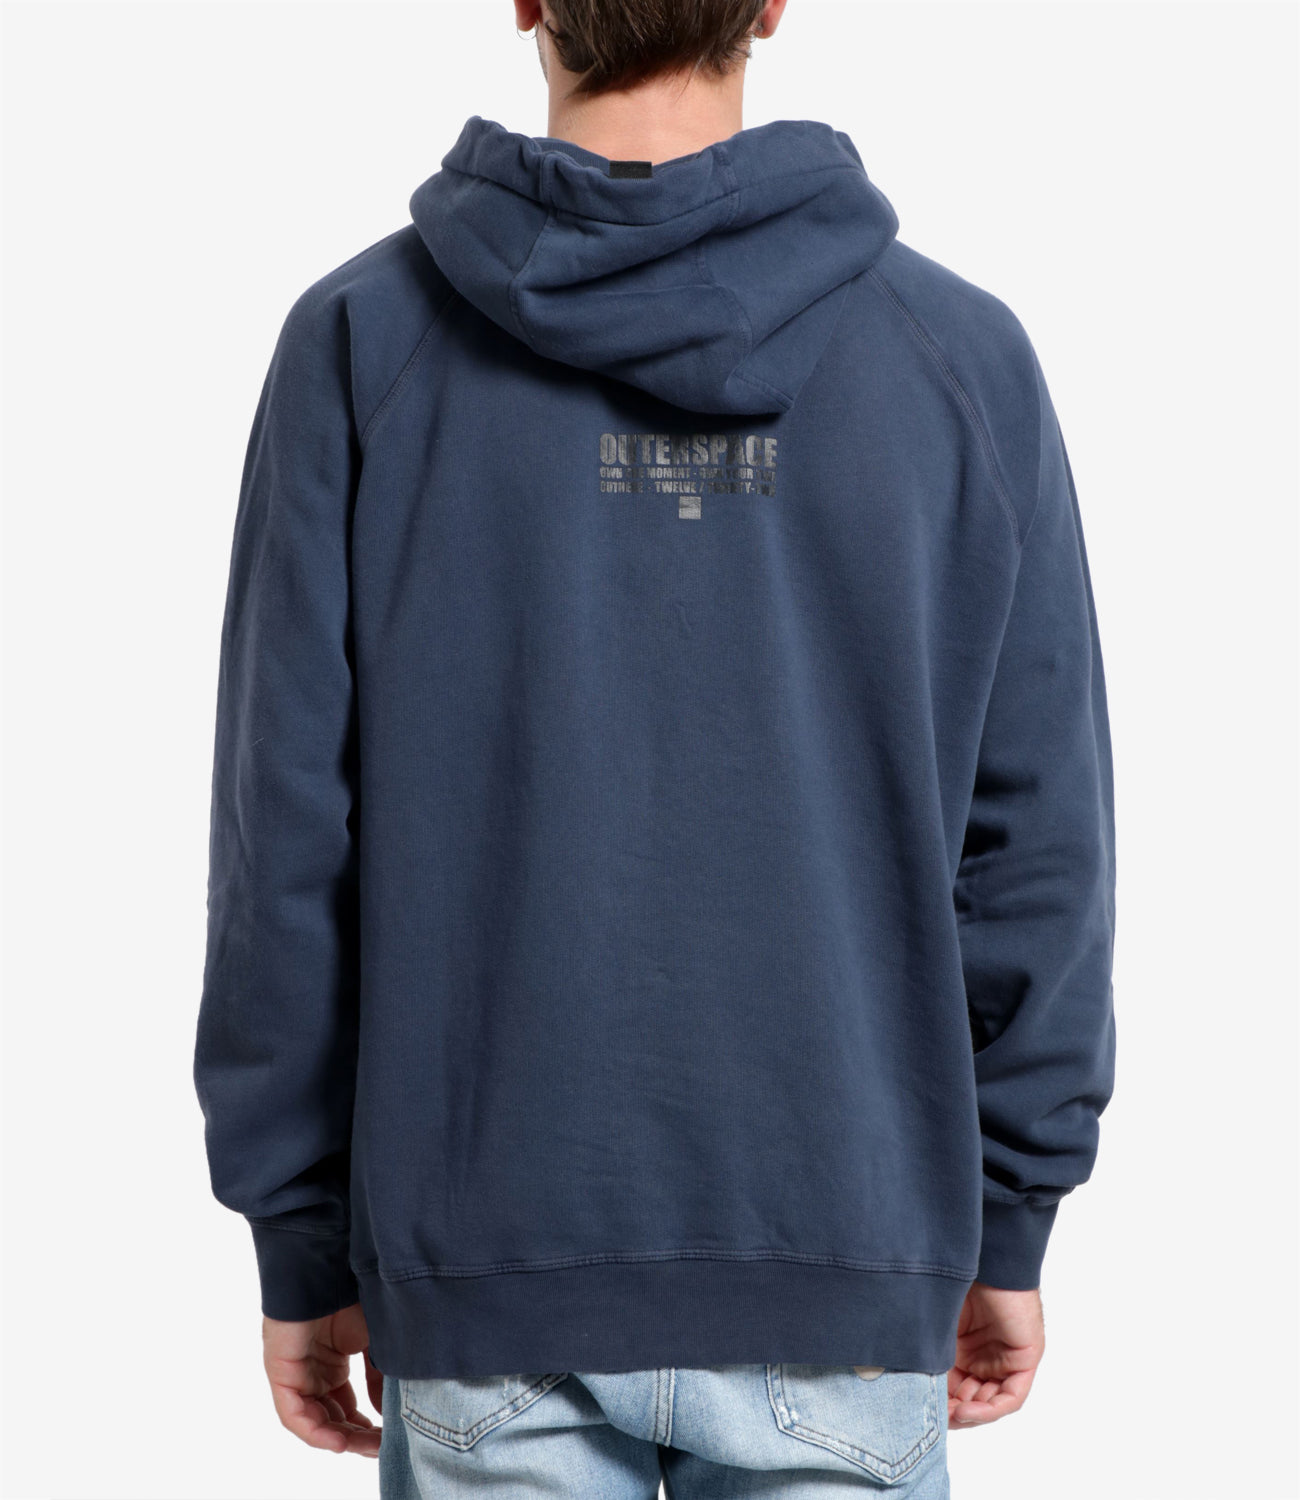 Outhere | Navy Blue Sweatshirt